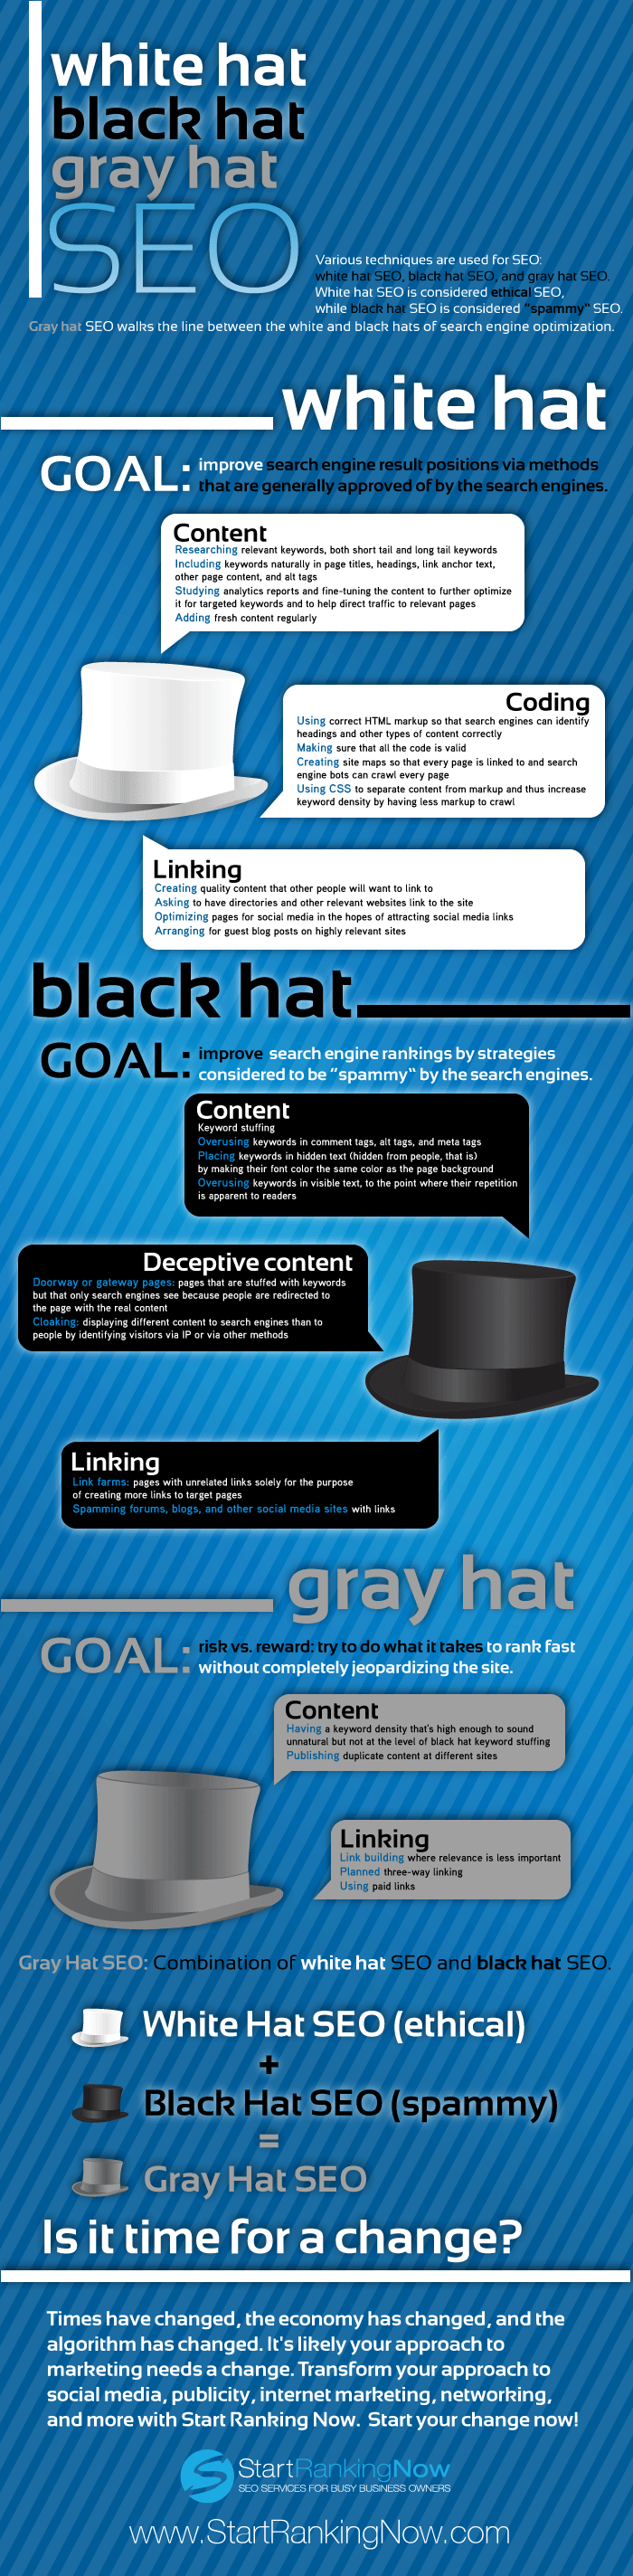 White hat, black hat and gray hat SEO Infographic